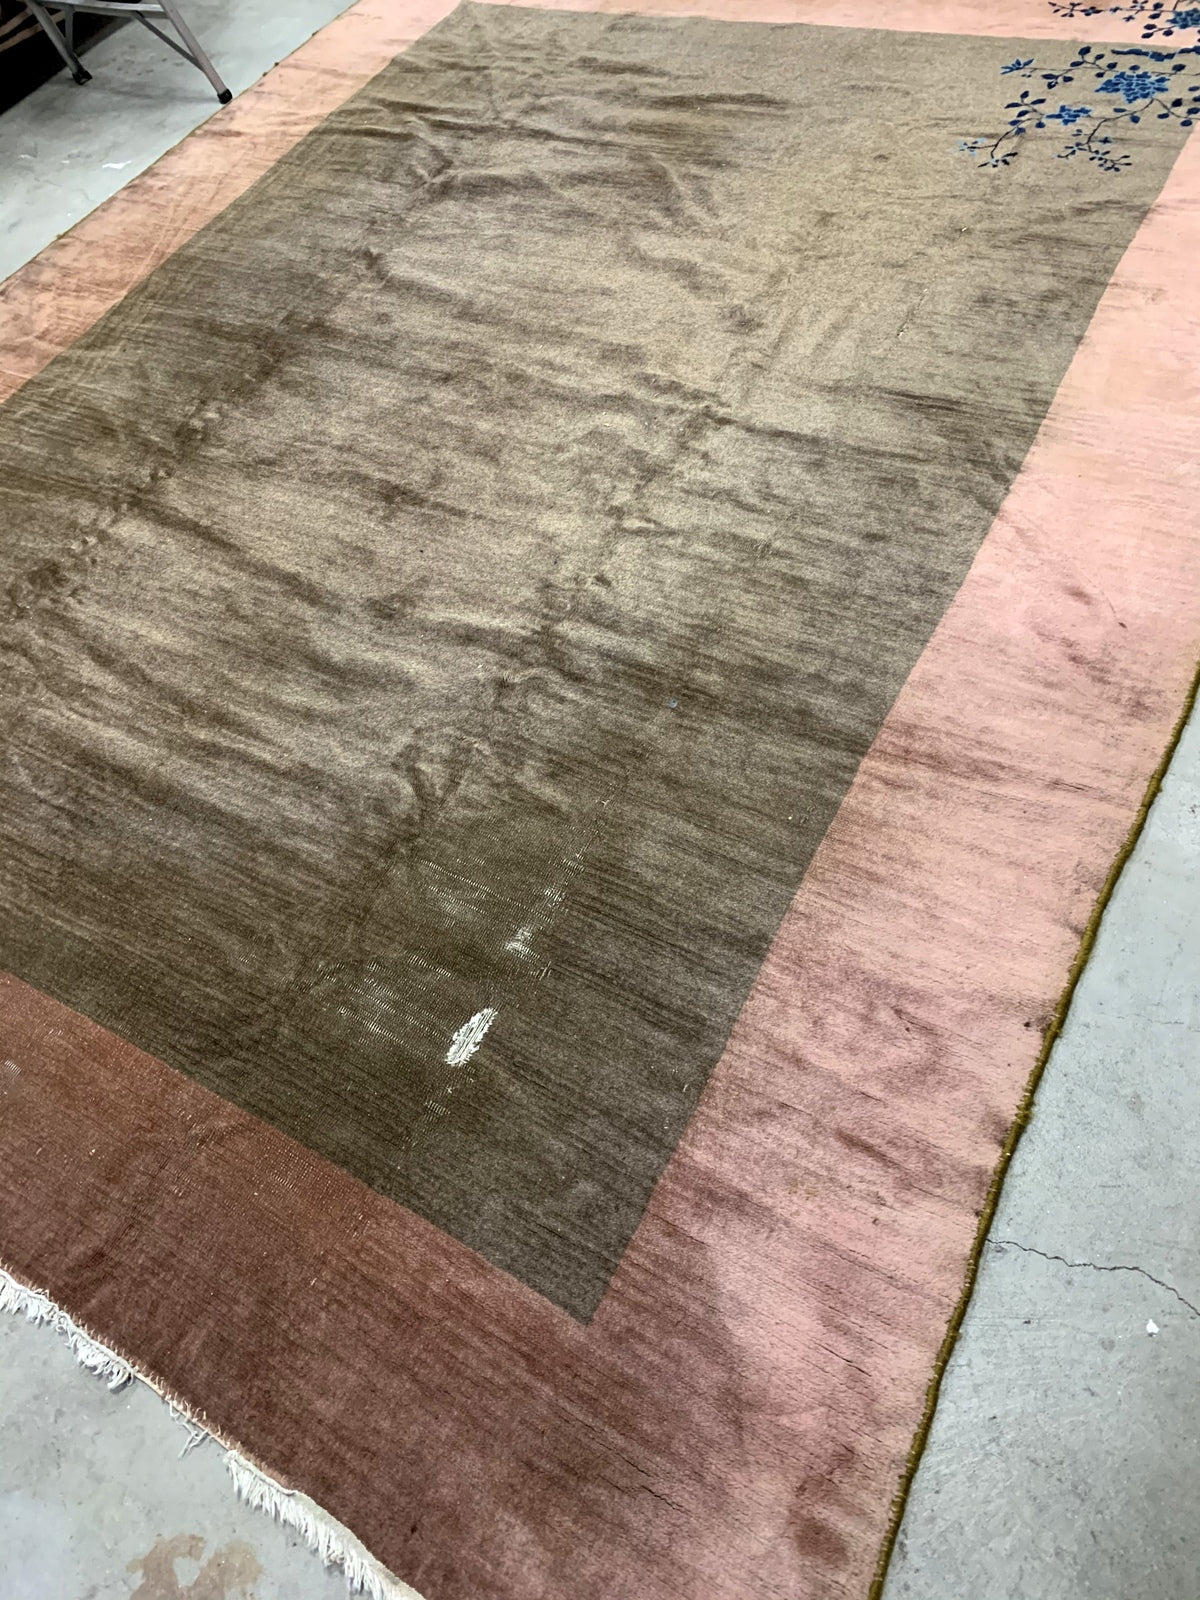 Handmade antique Art Deco Chinese rug in olive green and peach shades. The rug is from the beginning of 20th century in original condition, it has some low pile. 